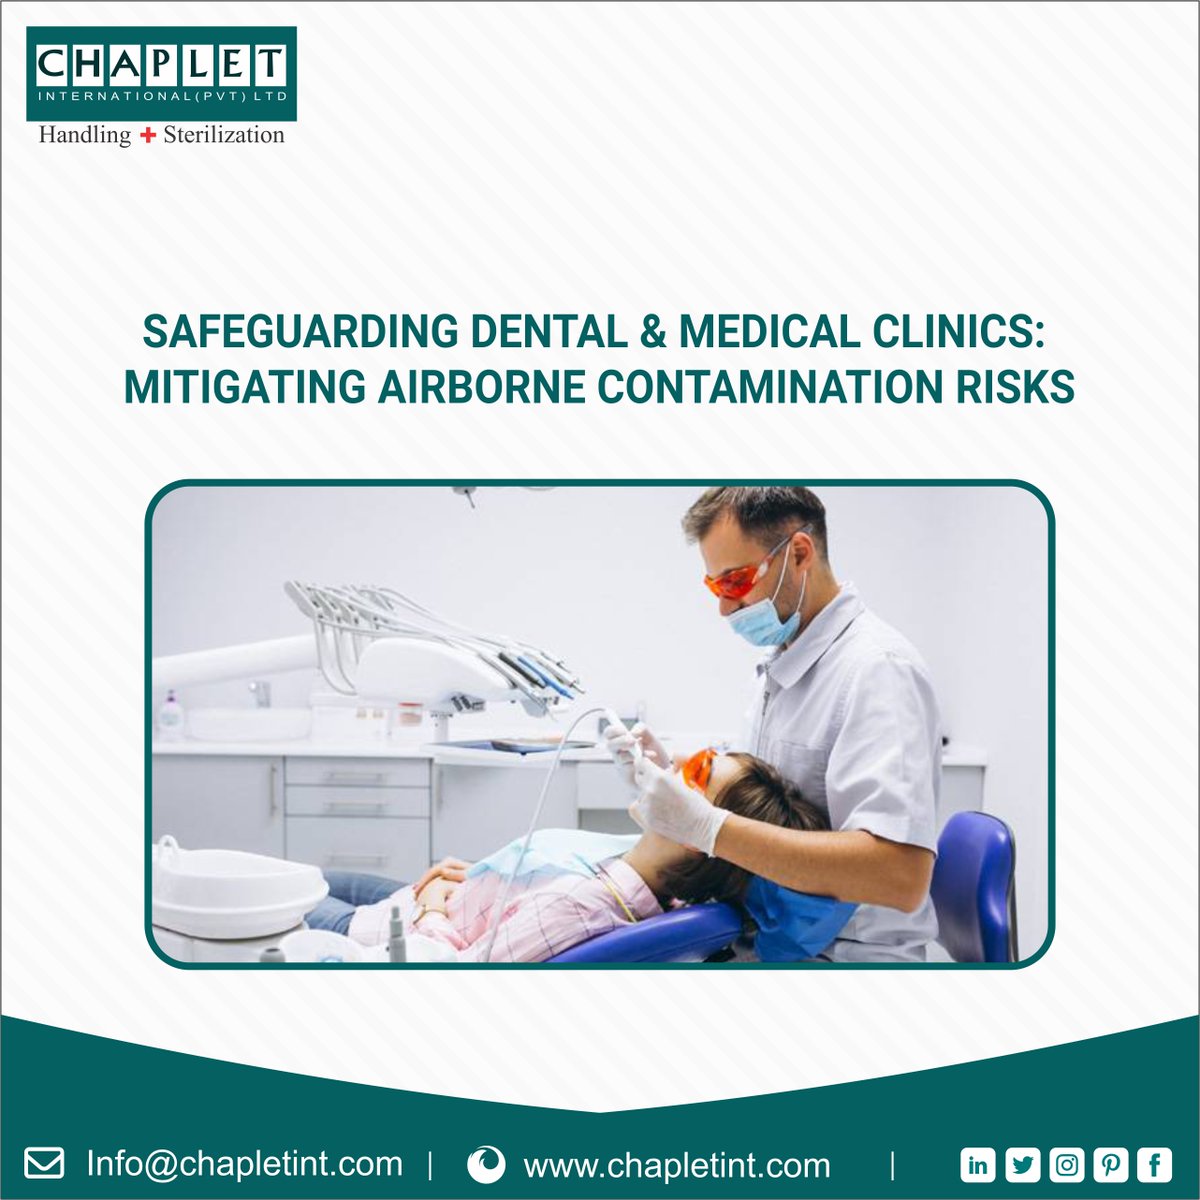 Protecting Dental & Medical Clinics: Mitigating Airborne Contamination - Prioritize Safety with Enhanced Ventilation, Stringent Sterilization, and PPE Compliance! ✨

Read More-> blog.chapletint.com

#AirborneContamination #HealthcareSafety #InfectionControl #PatientSafety